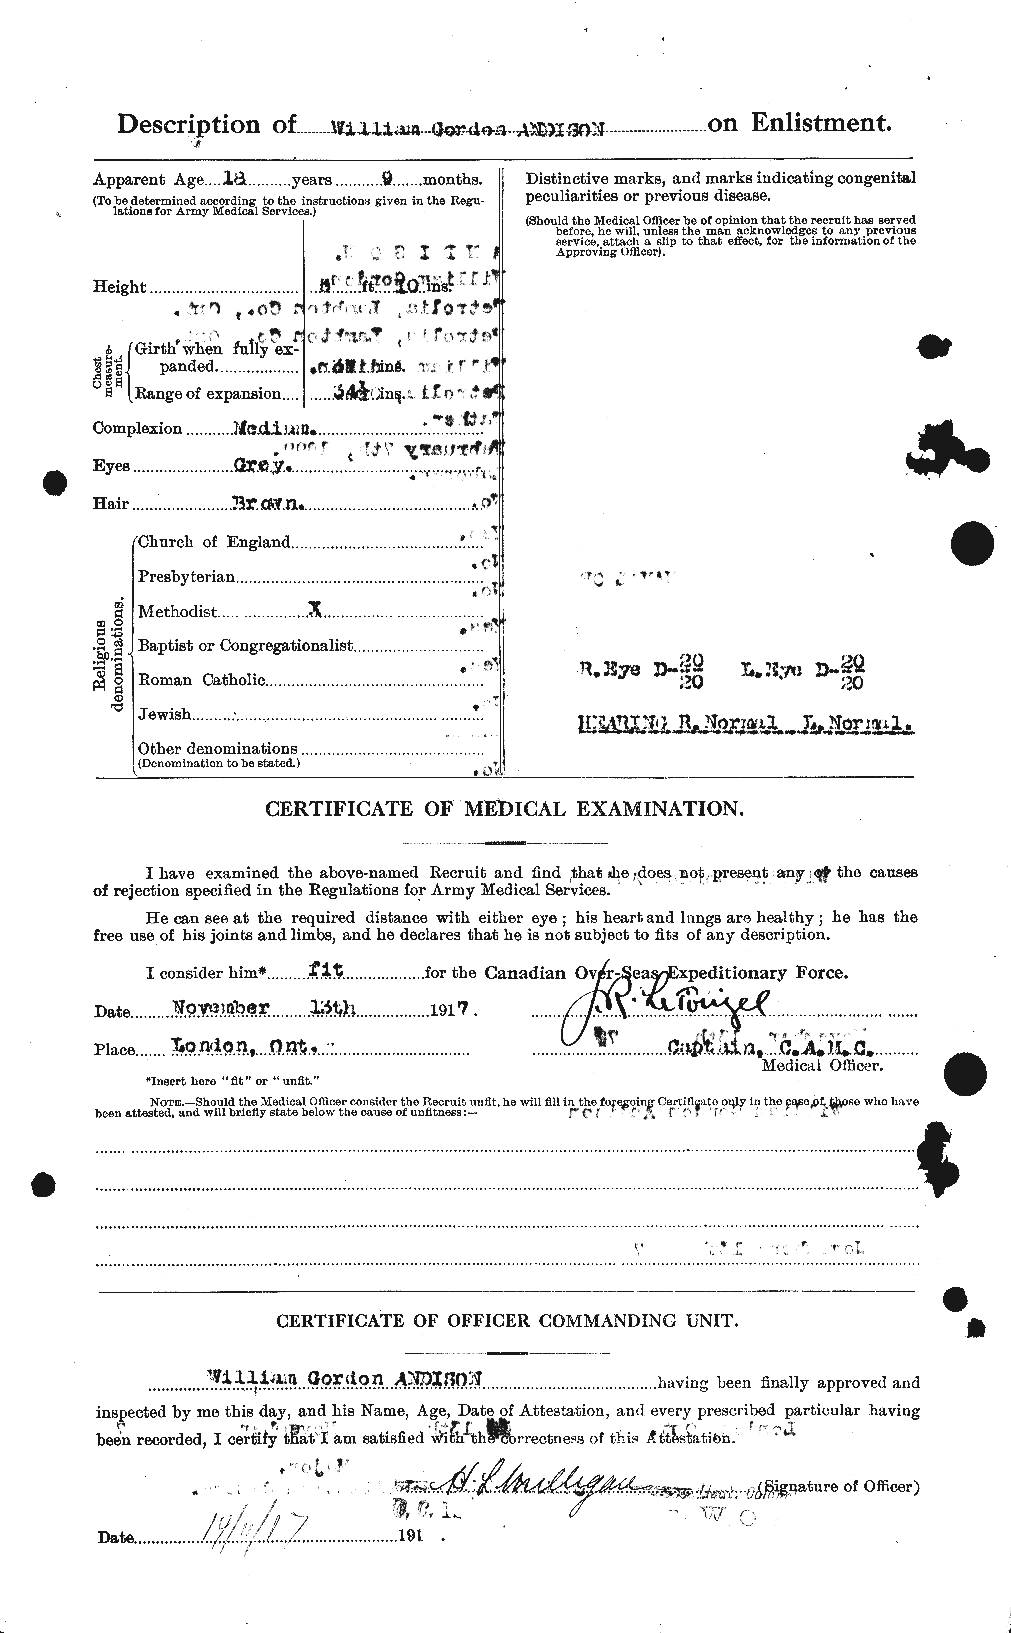 Personnel Records of the First World War - CEF 210881b